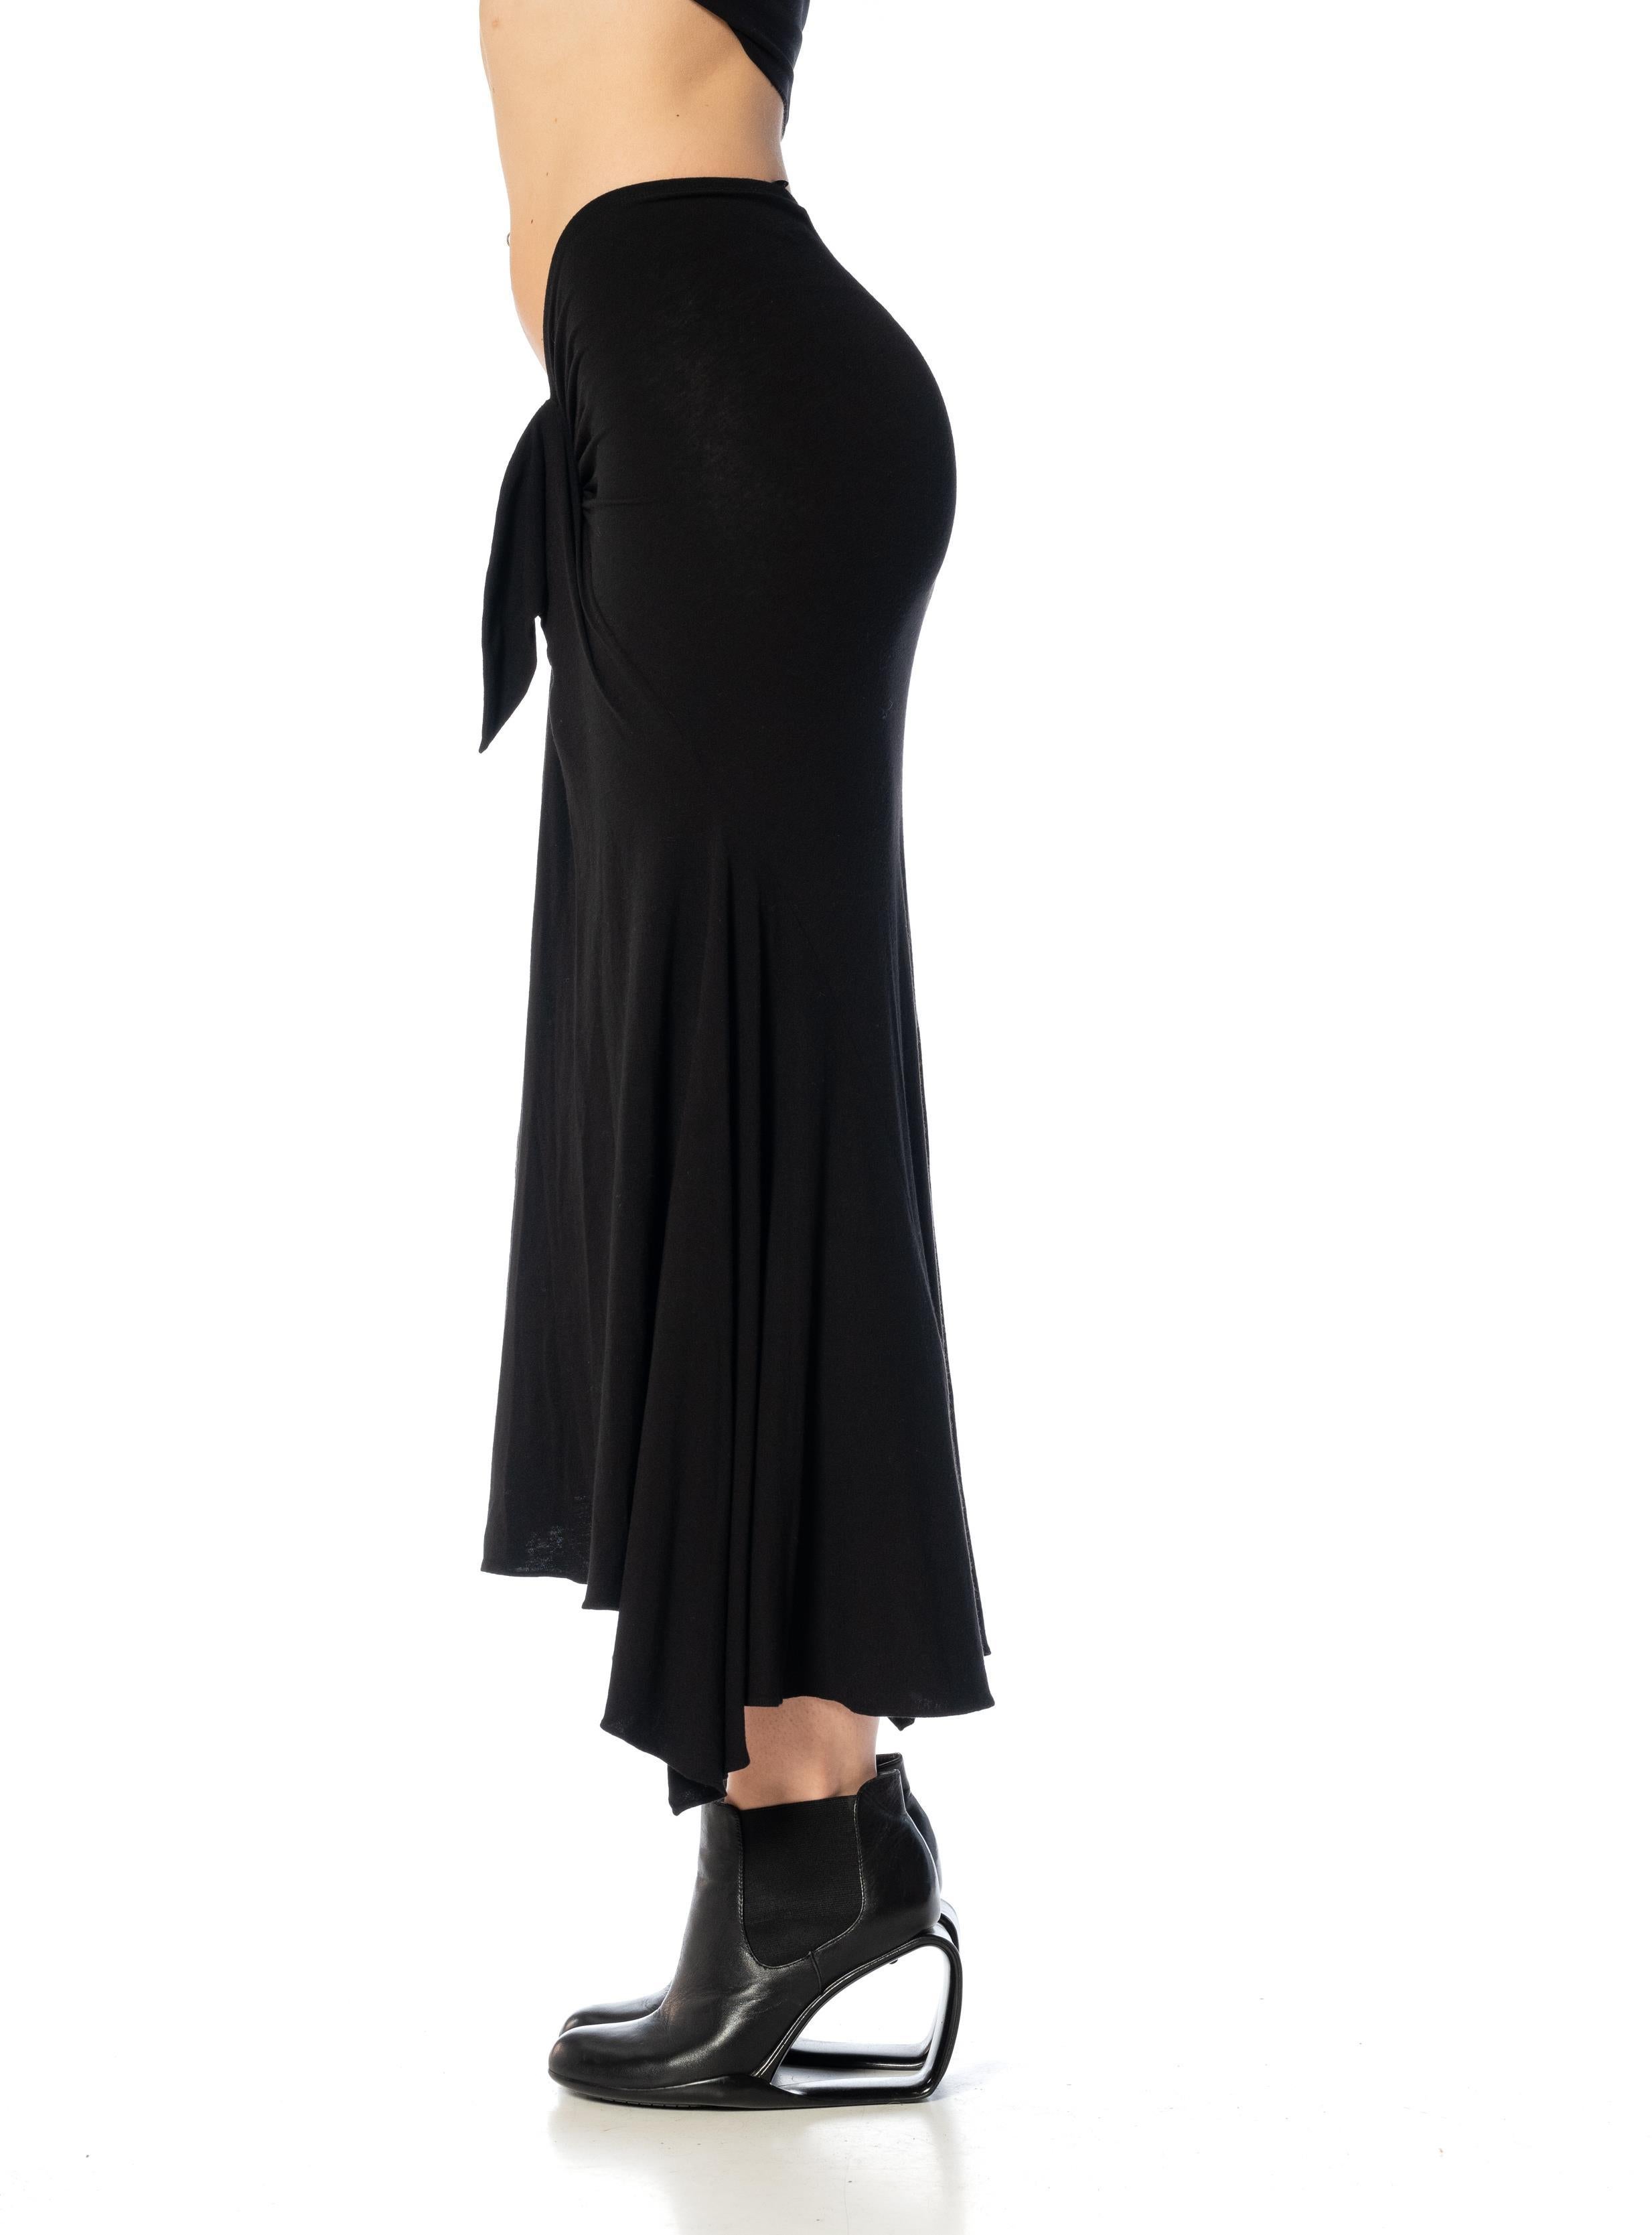 1990S Donna Karan Black Rayon Ruffled Draped Skirt In Excellent Condition For Sale In New York, NY